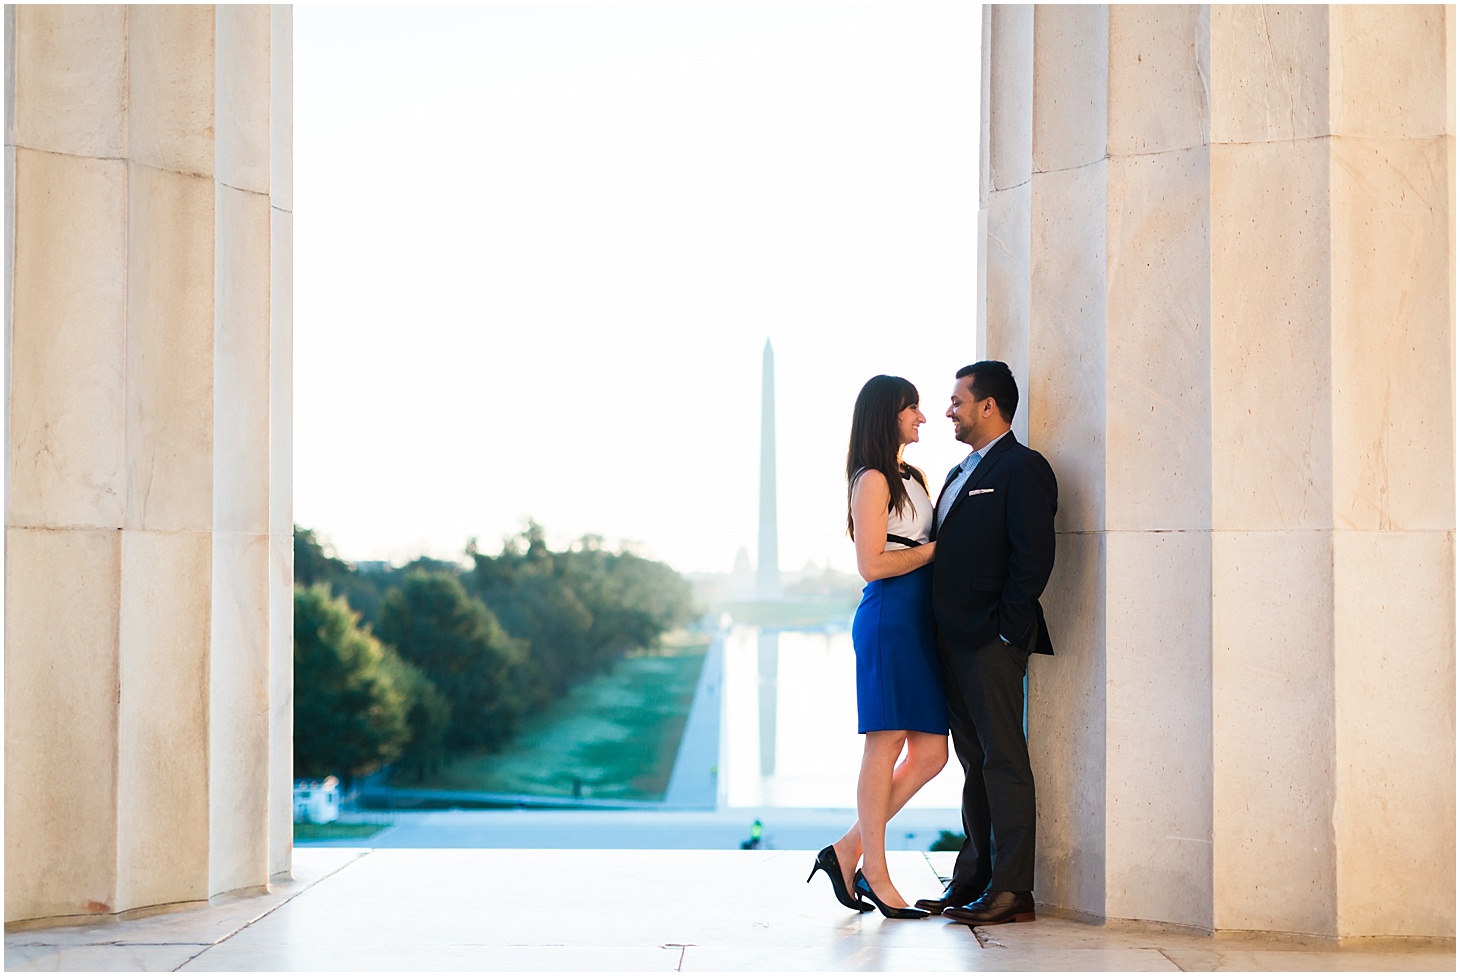 Sunrise Engagement Session at Lincoln Memorial | Colorful Fall Engagement Session in Georgetown | Sarah Bradshaw Photography